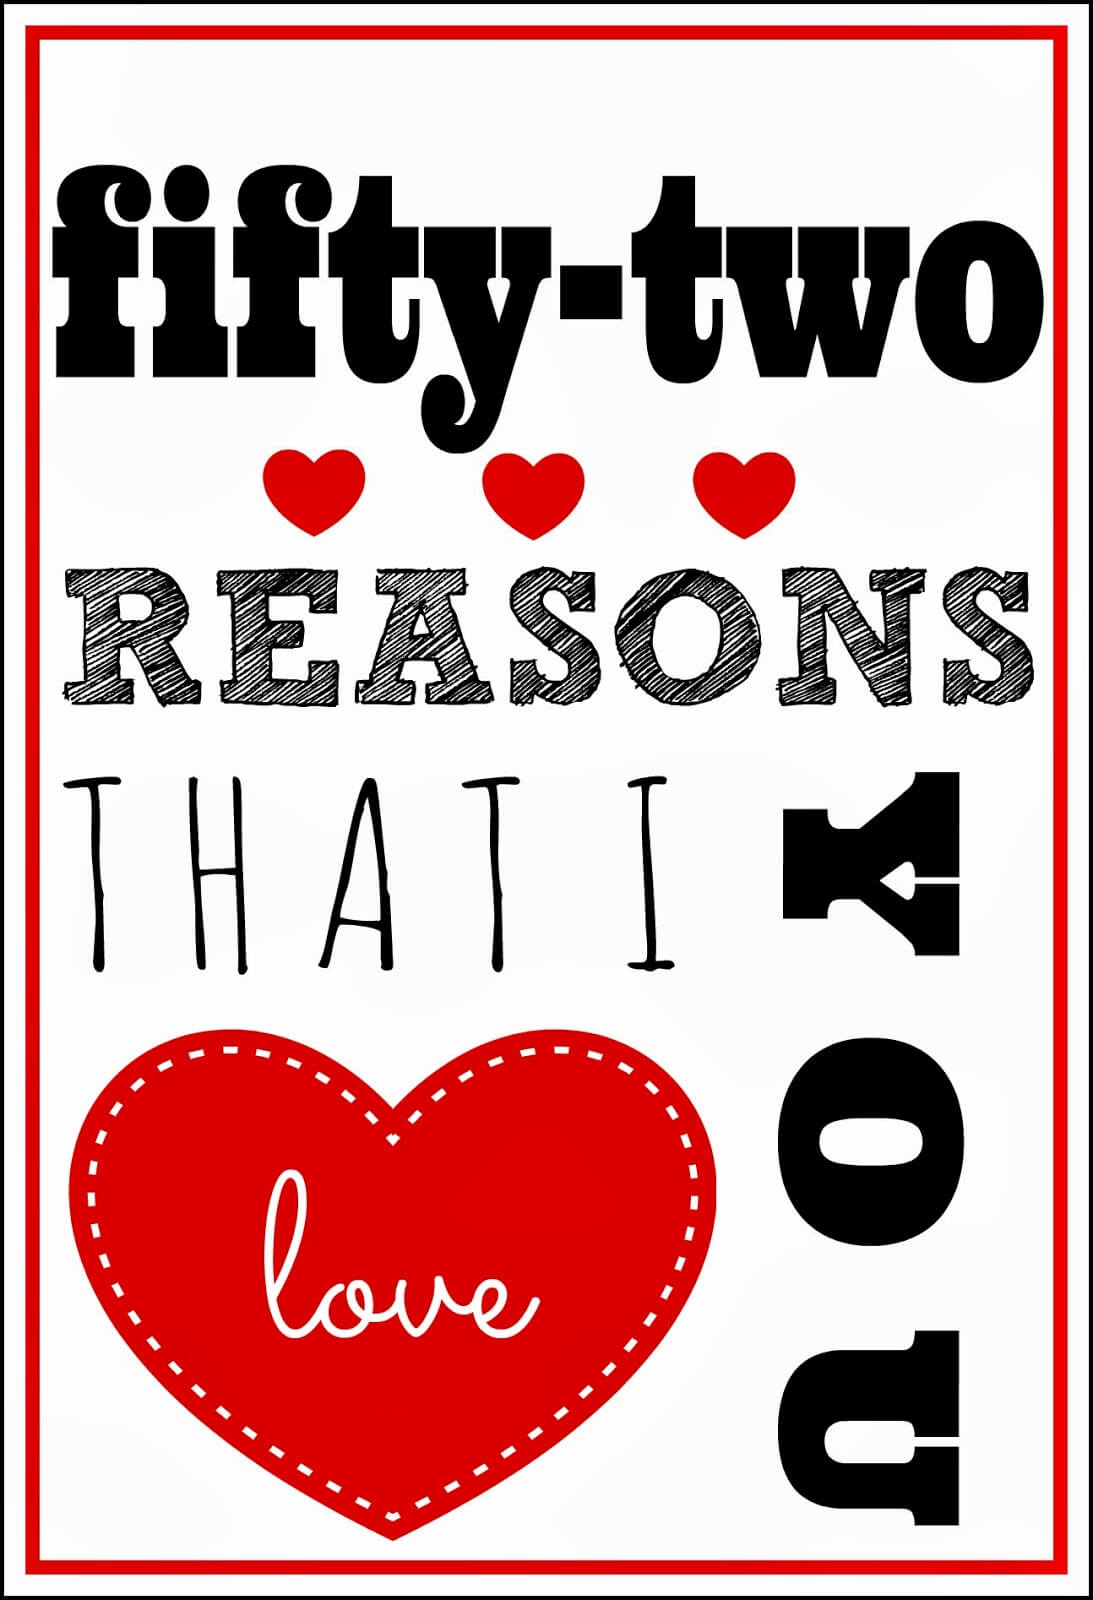 52 Reasons I Love You Template Free ] - 1000 Ideas About 52 Pertaining To 52 Reasons Why I Love You Cards Templates Free